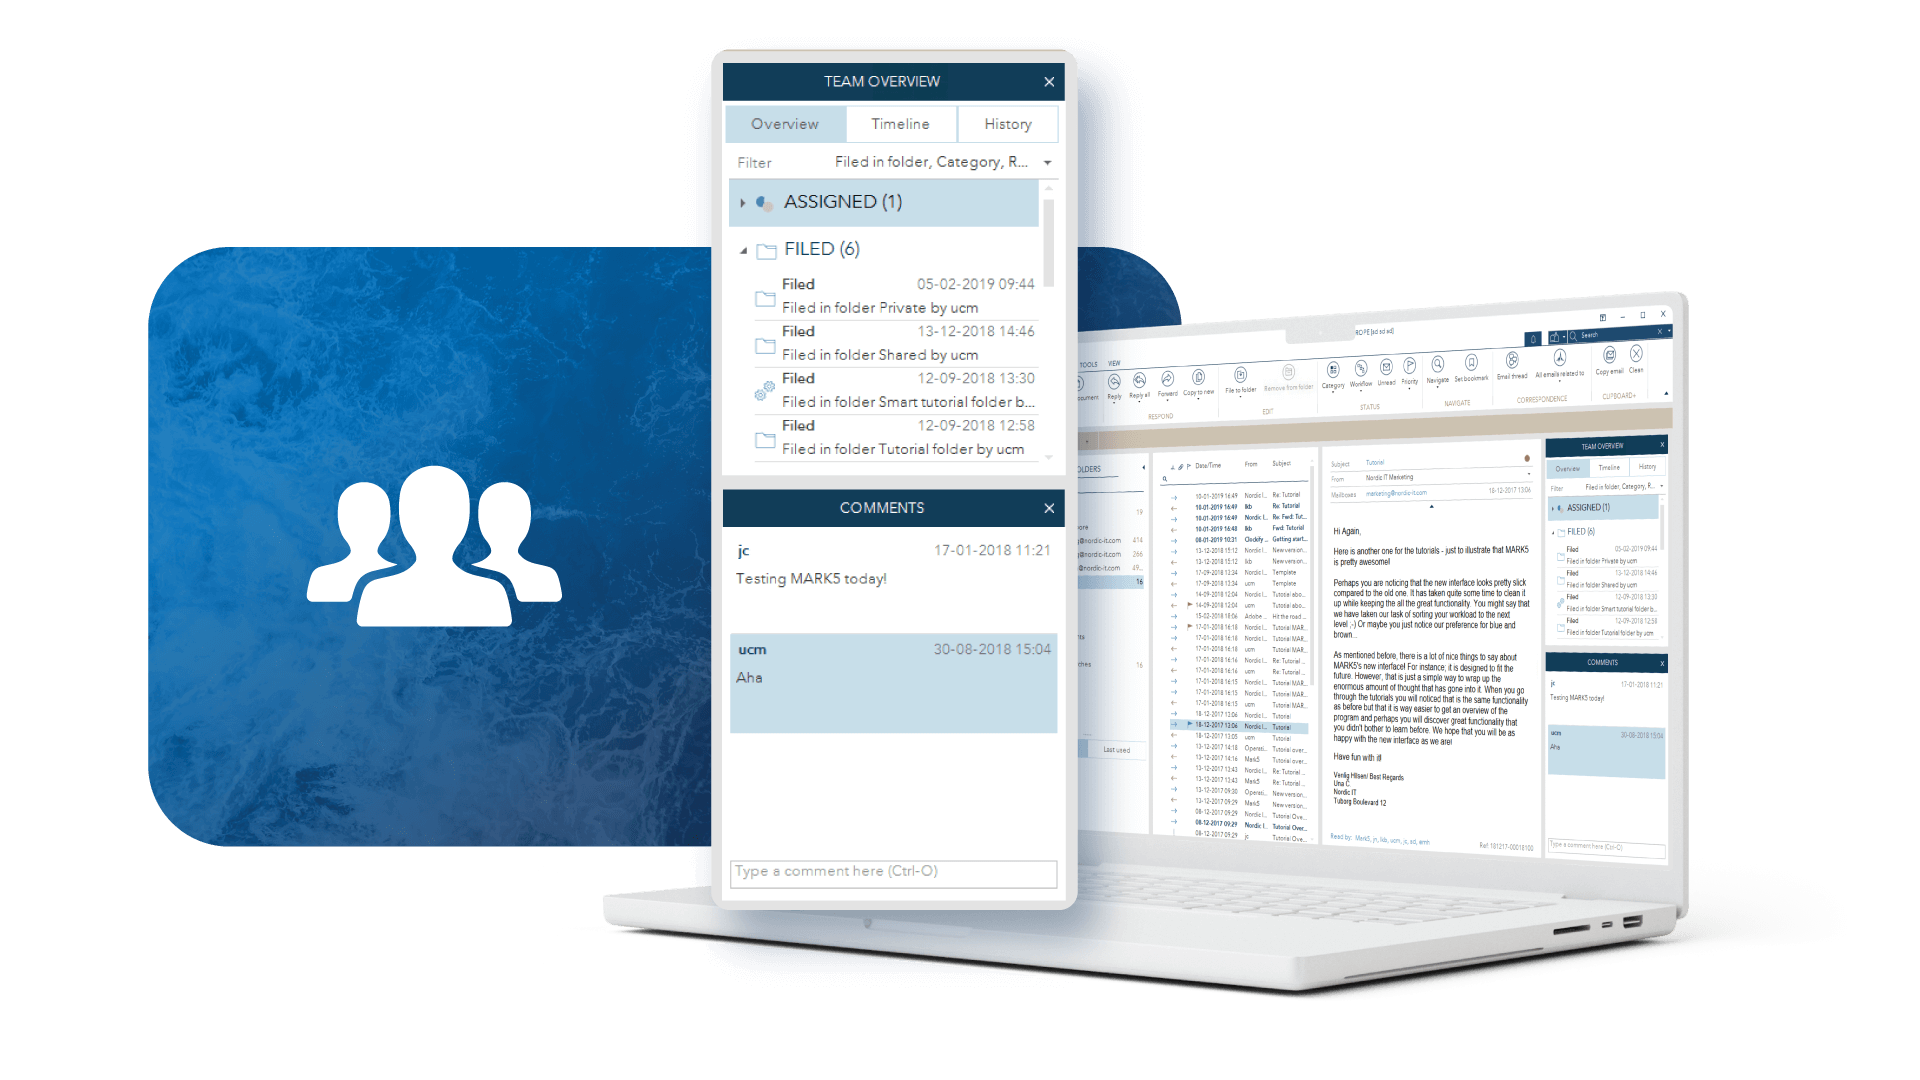 reMARK's collaborative email solution includes team member activity tracking and commenting so users can easily manage high volumes of emails.